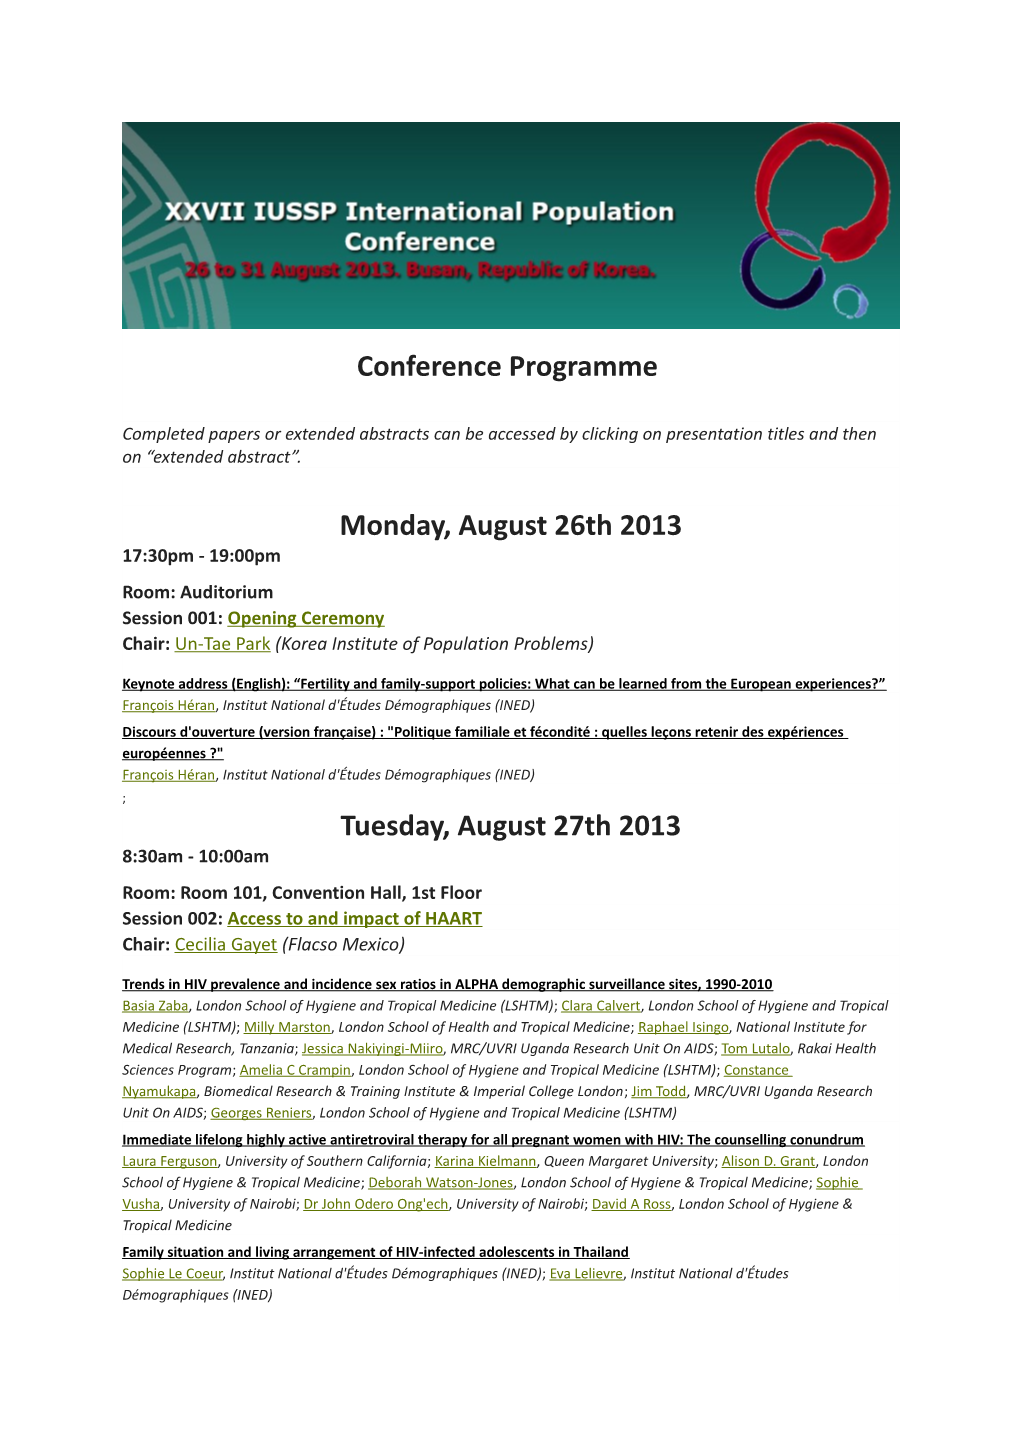 Conference Programme Monday, August 26Th 2013 Tuesday, August 27Th 2013